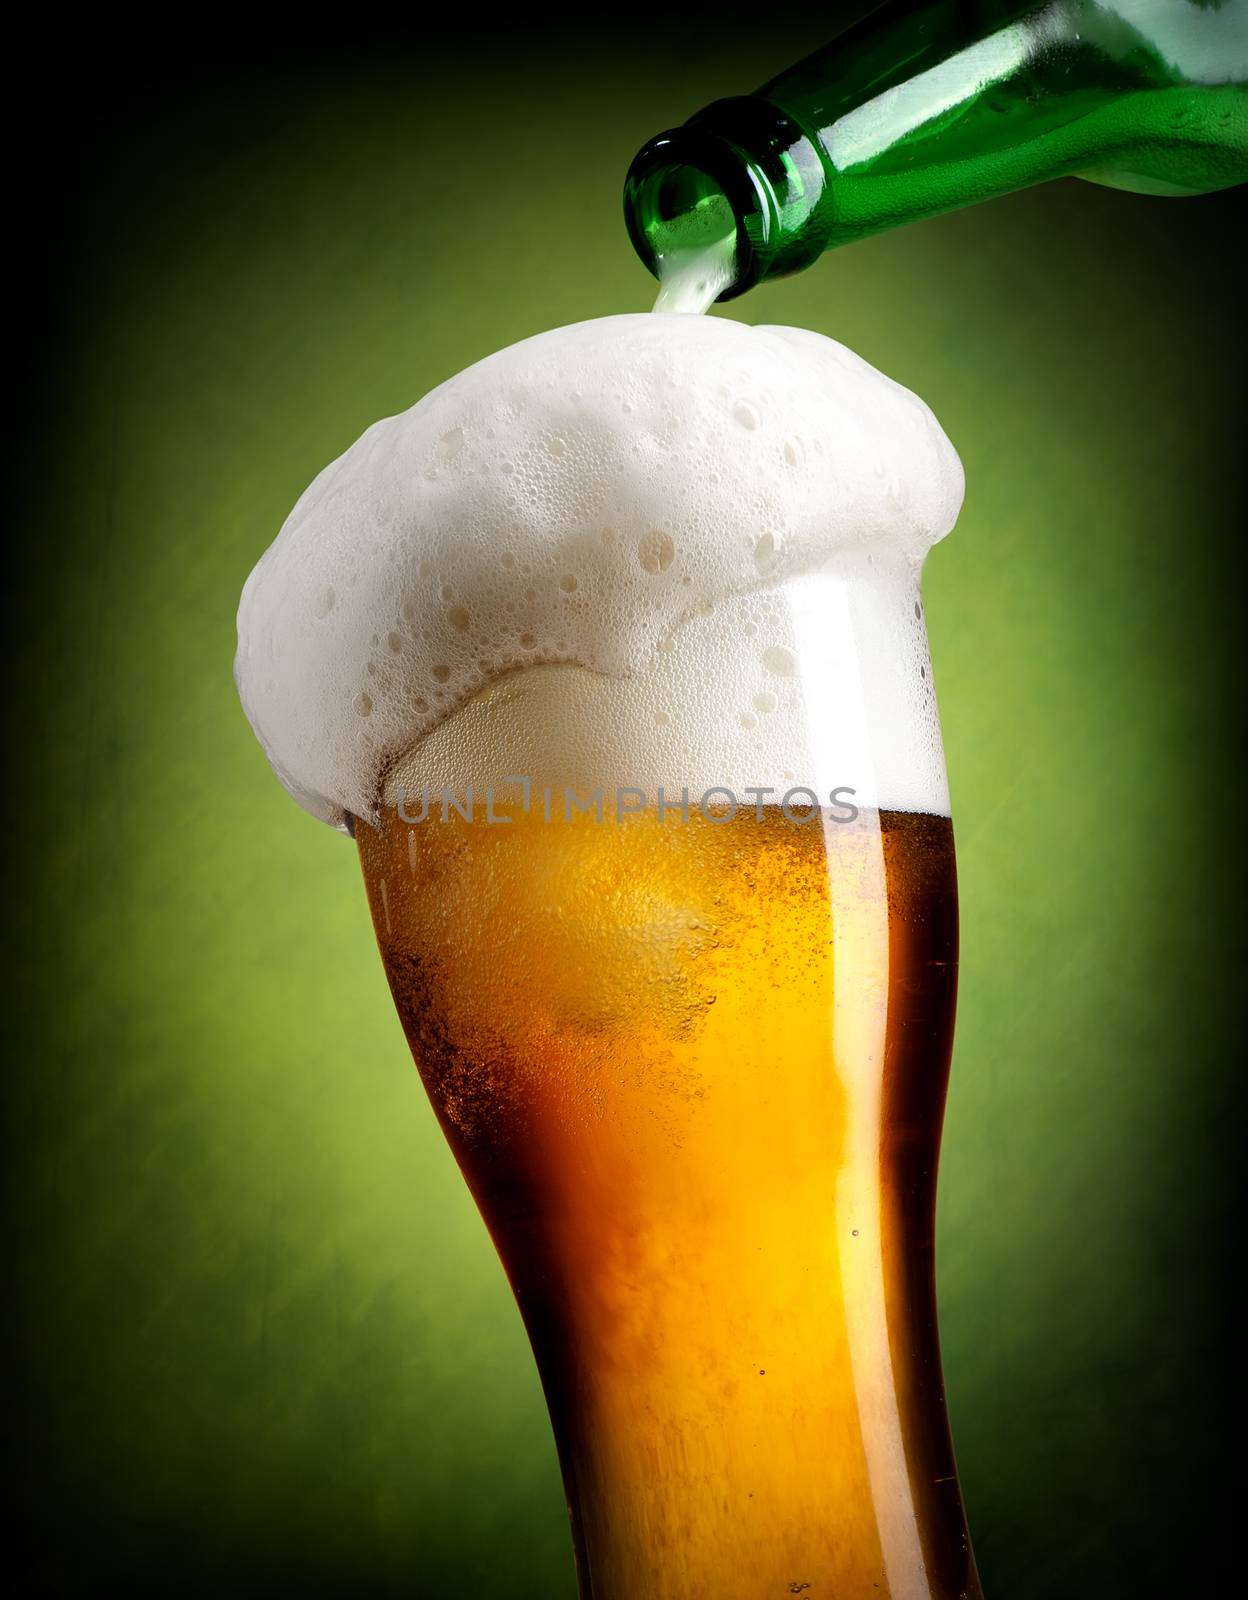 Beer pouring into glass on green background